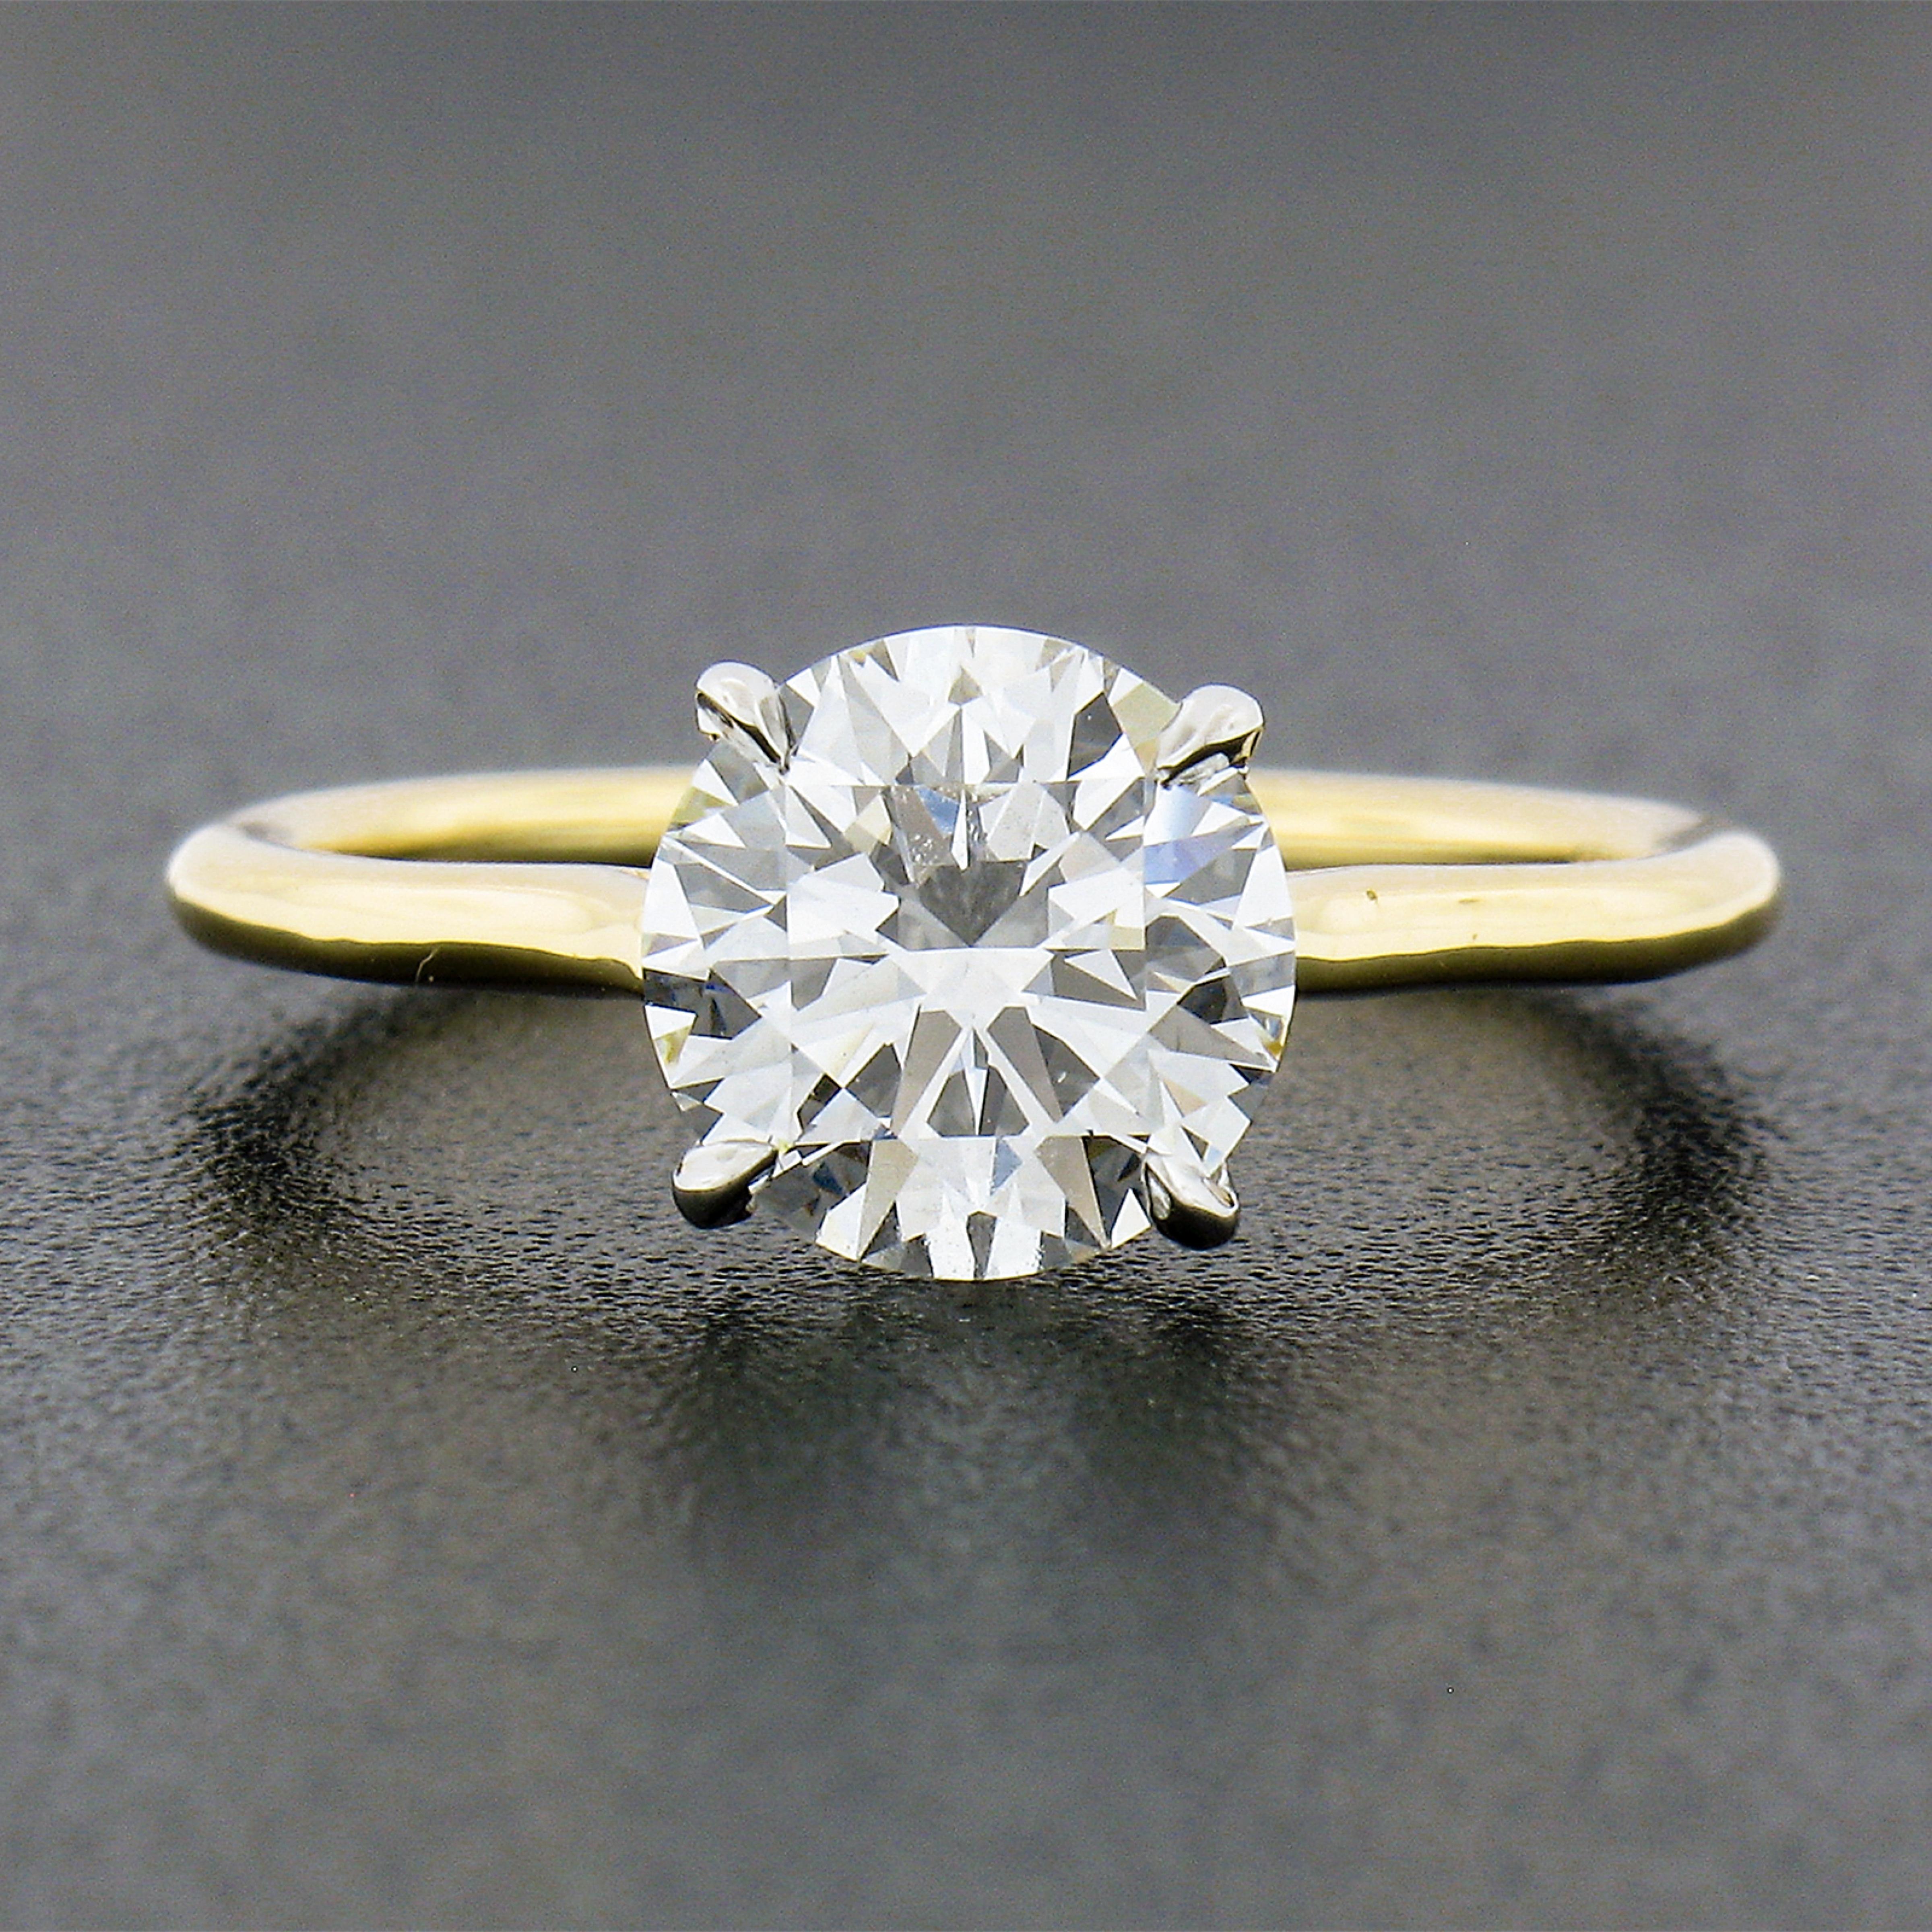 New 18k Gold & Platinum Gia 1.51ct Ideal Round Diamond Solitaire Engagement Ring In New Condition For Sale In Montclair, NJ